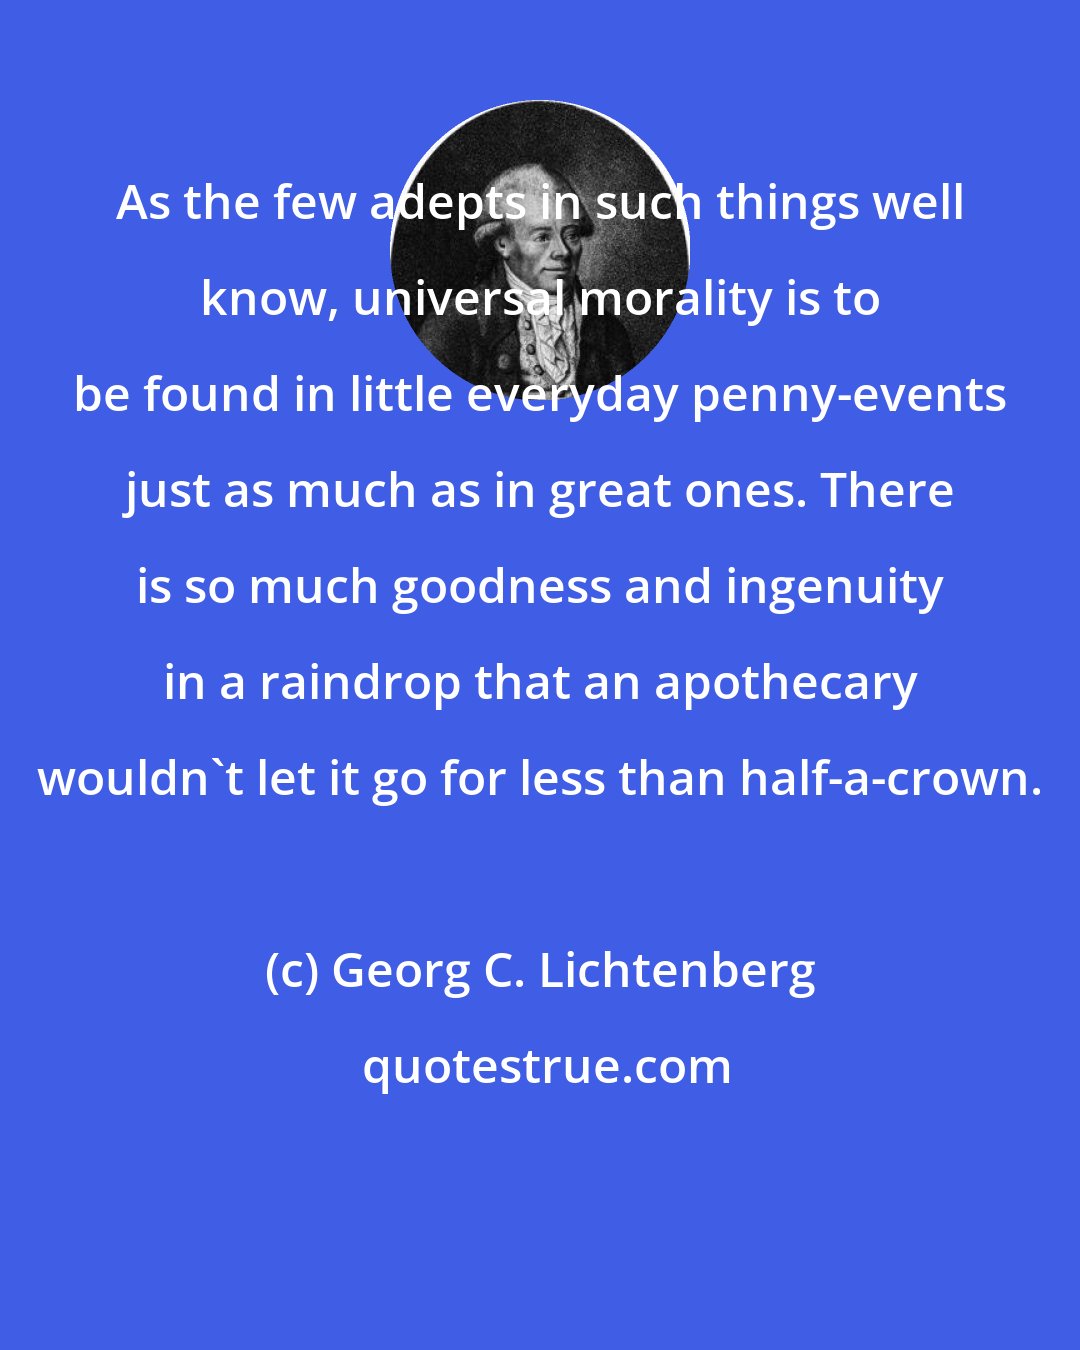 Georg C. Lichtenberg: As the few adepts in such things well know, universal morality is to be found in little everyday penny-events just as much as in great ones. There is so much goodness and ingenuity in a raindrop that an apothecary wouldn't let it go for less than half-a-crown.